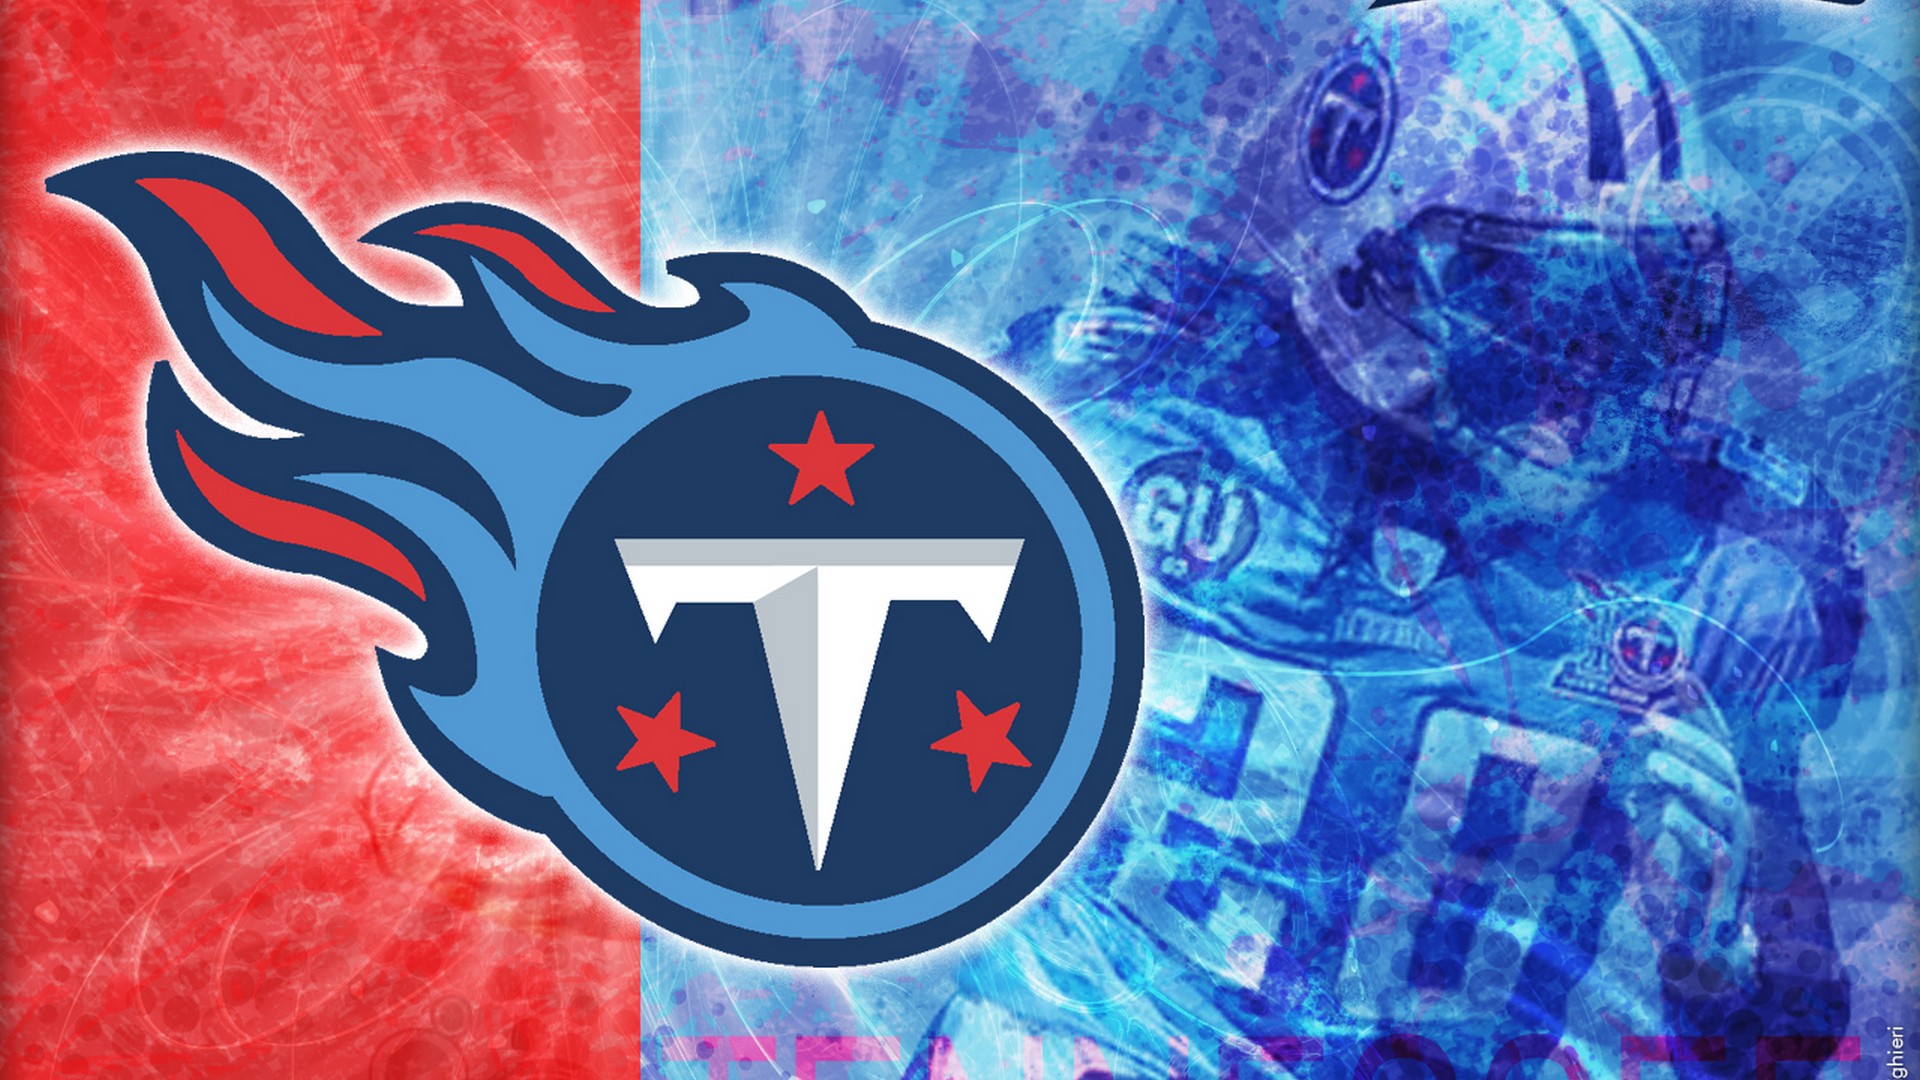 HD Tennessee Titans Wallpapers With high-resolution 1920X1080 pixel. You can use this wallpaper for your Mac or Windows Desktop Background, iPhone, Android or Tablet and another Smartphone device